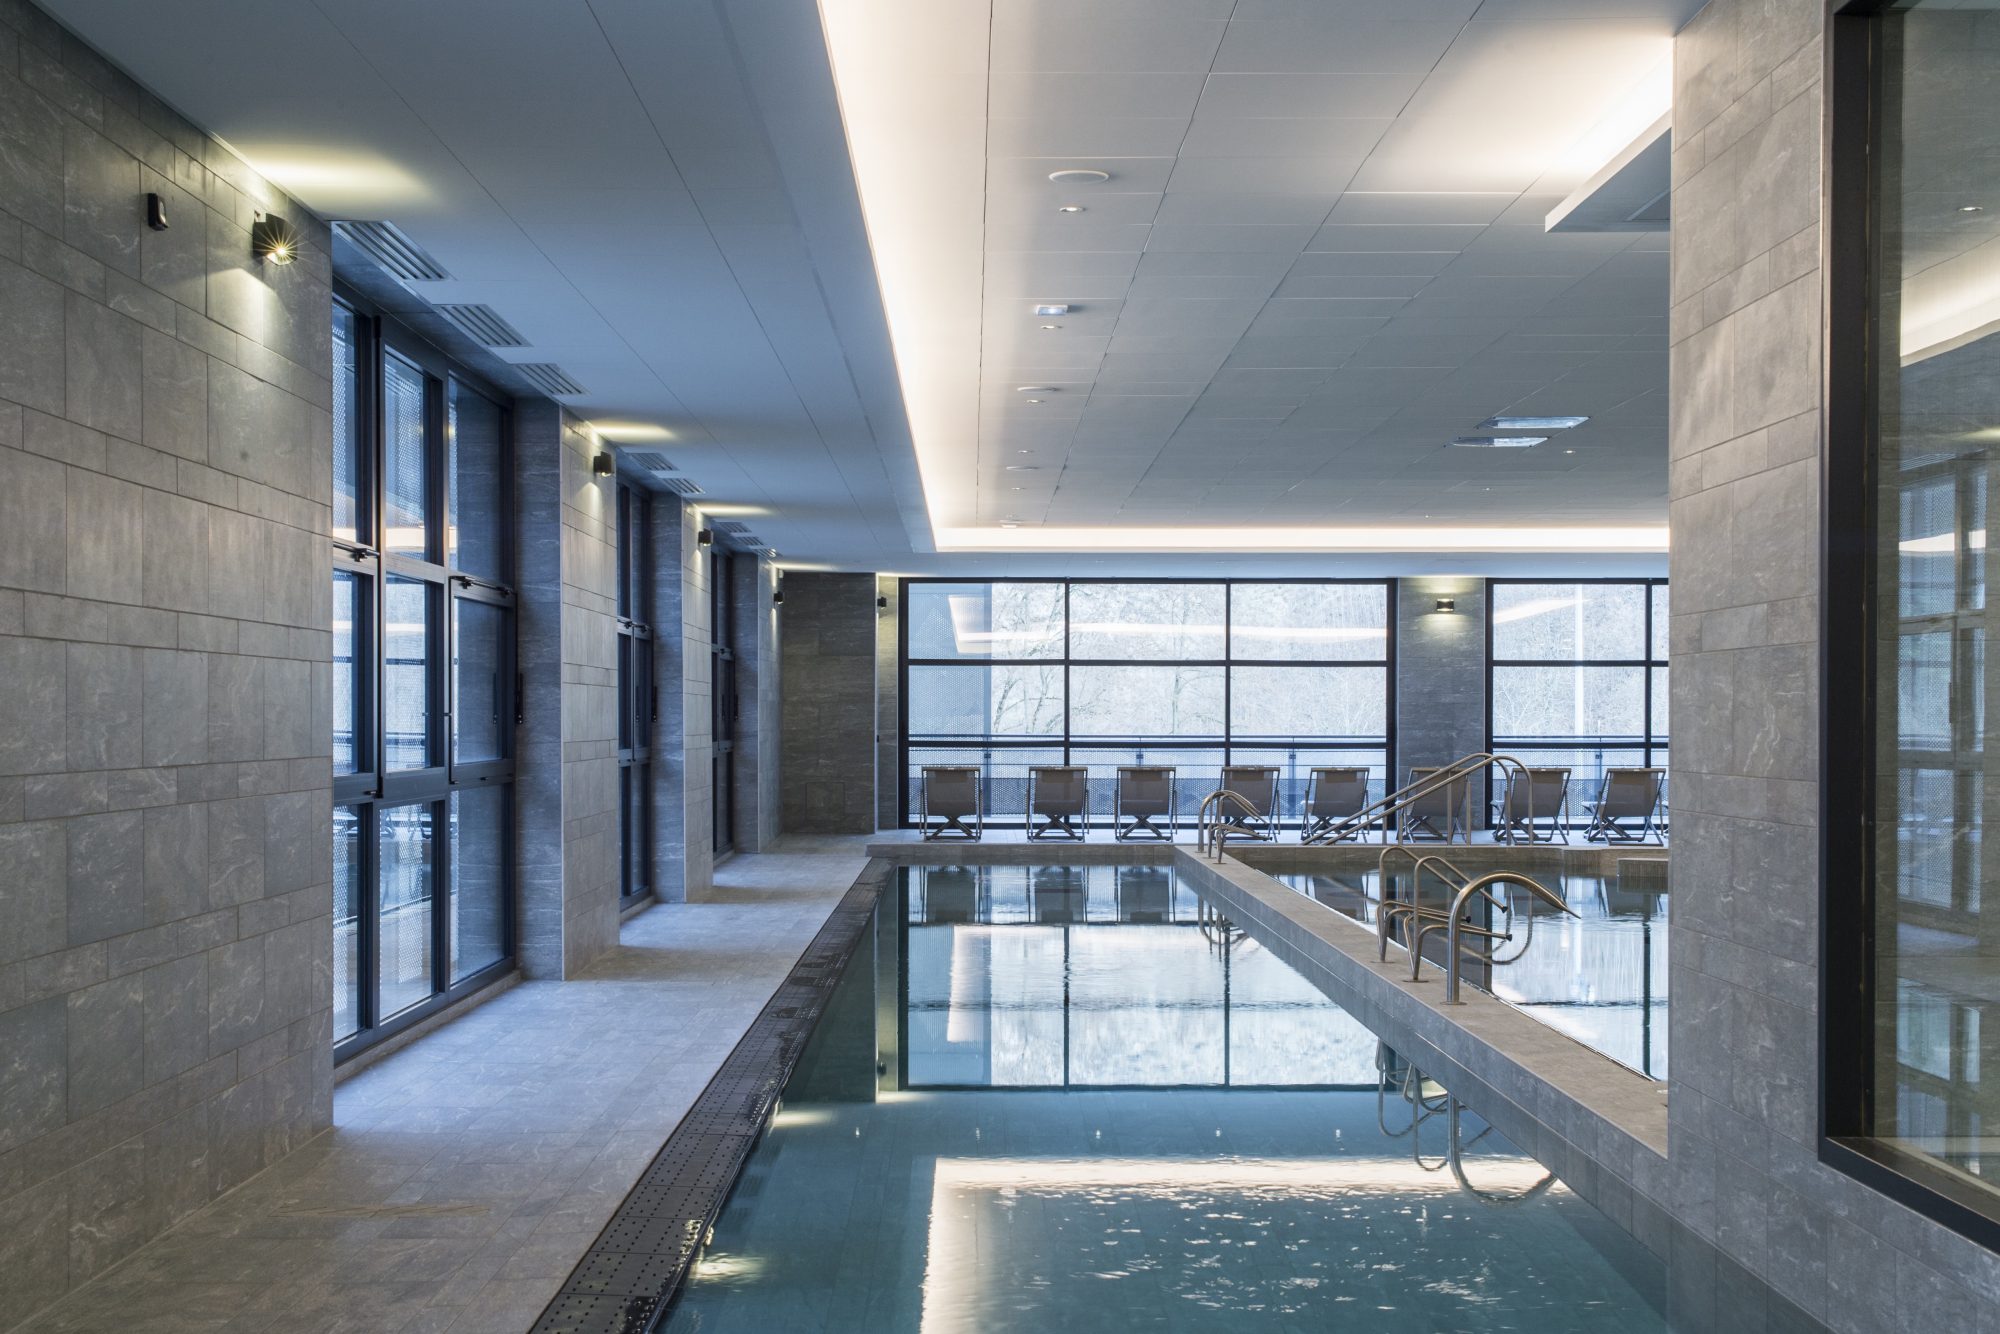 Le Grand Spa Thermal &#8211; France&#8217;s Largest Thermal Spa Opens in Brides-Les-Bains